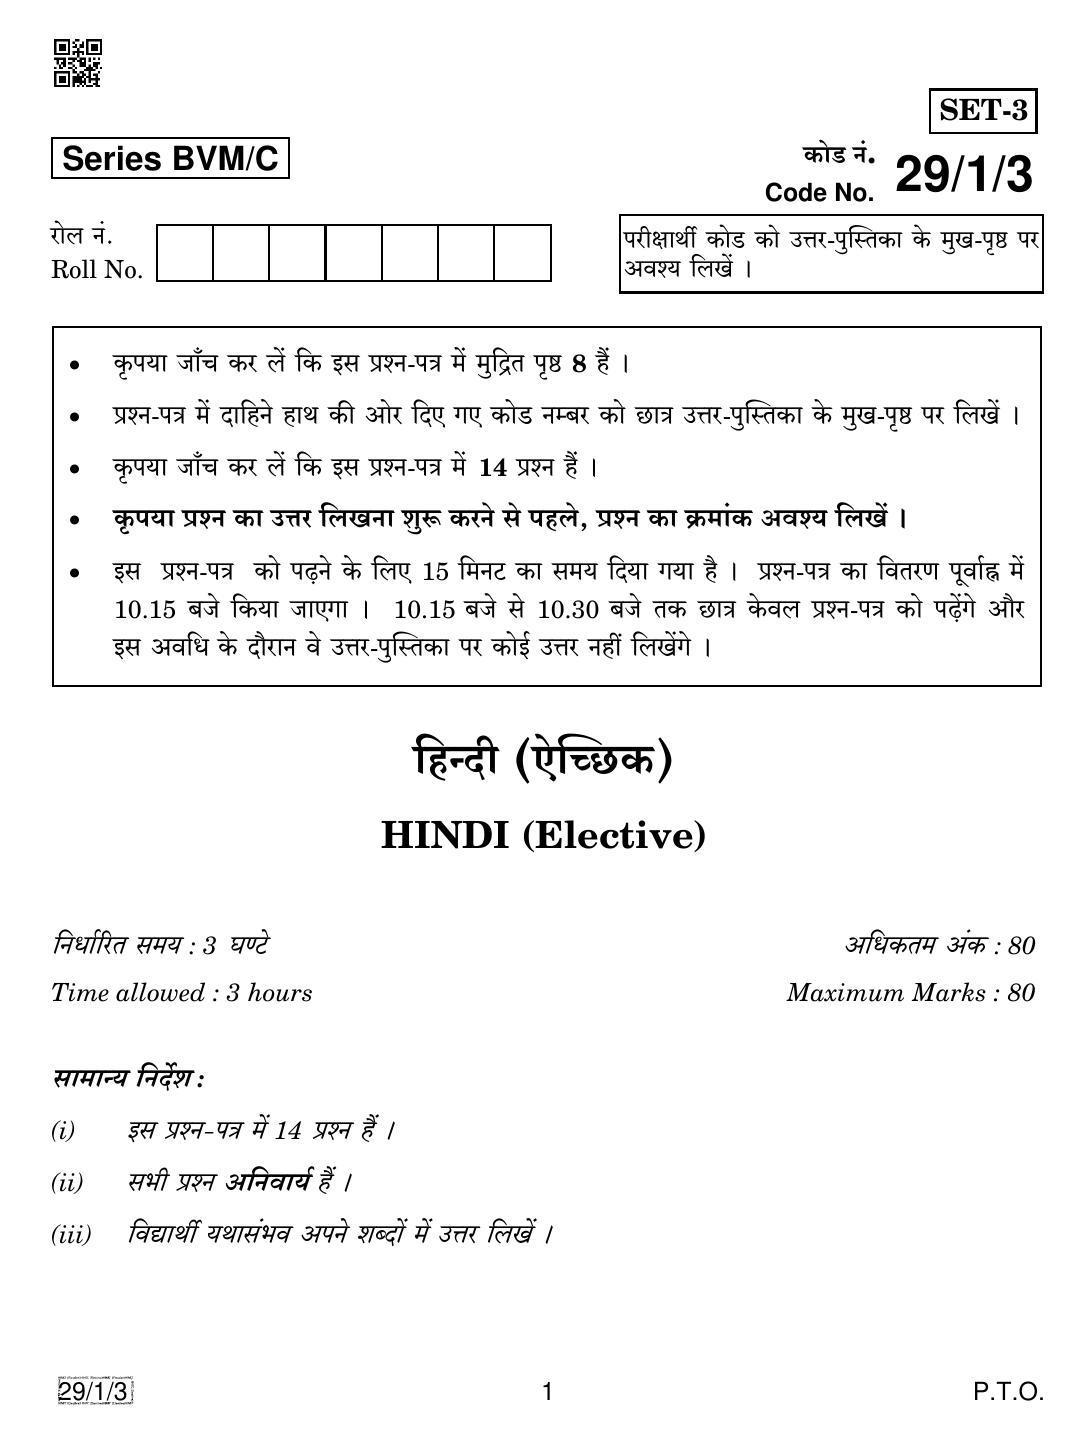 CBSE Class 12 29-1-3 HINDI ELECTIVE 2019 Compartment Question Paper - Page 1